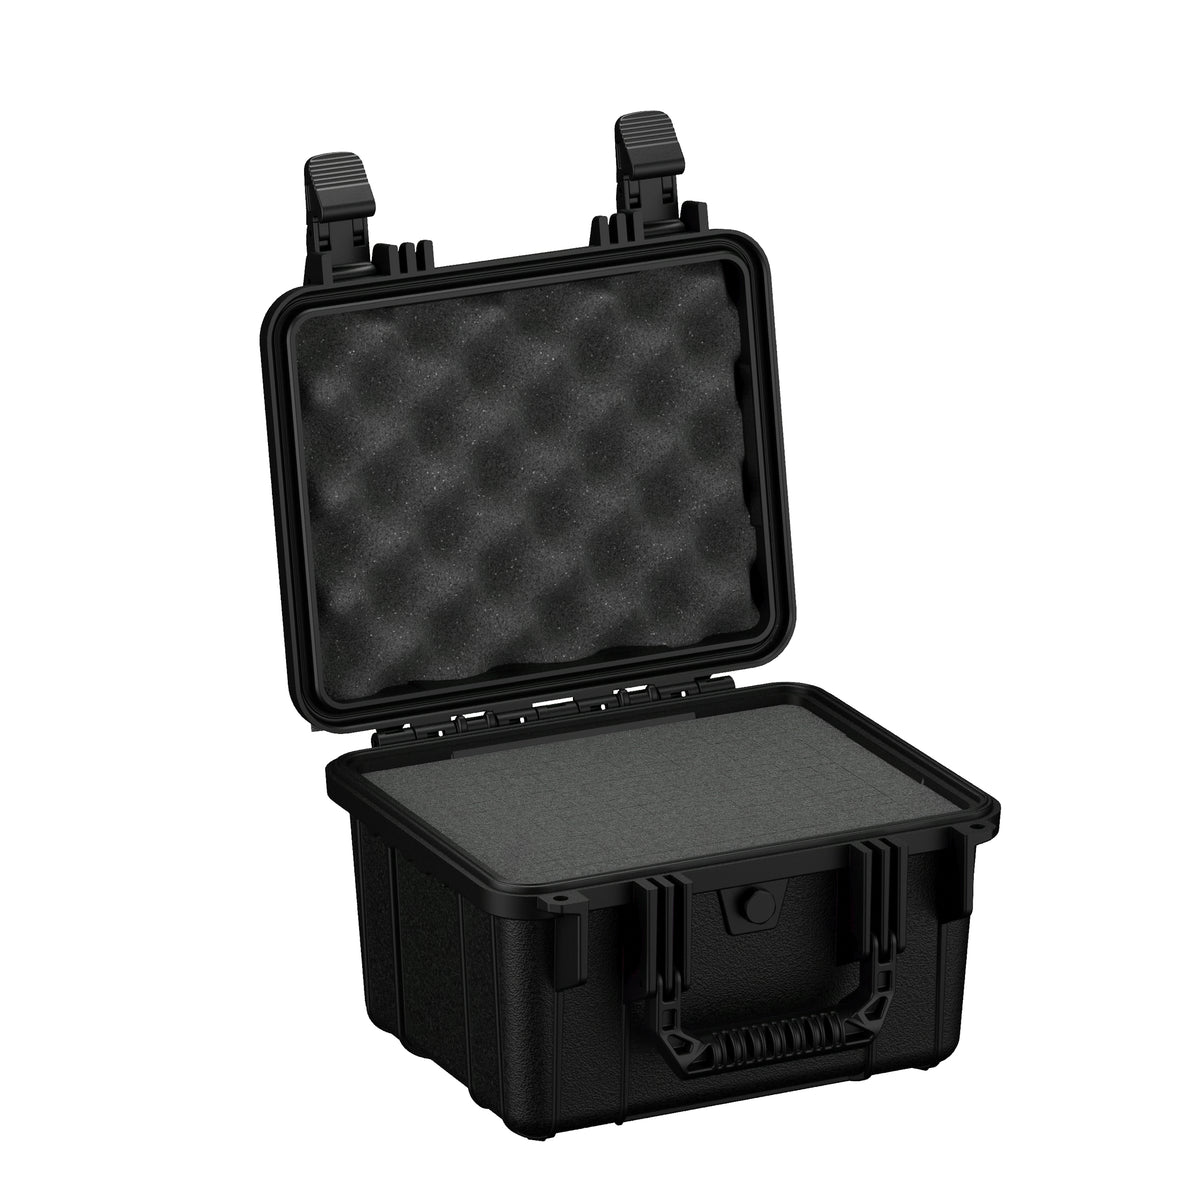 Replacement Foam for Customizable Equipment Cases — Turtlecase